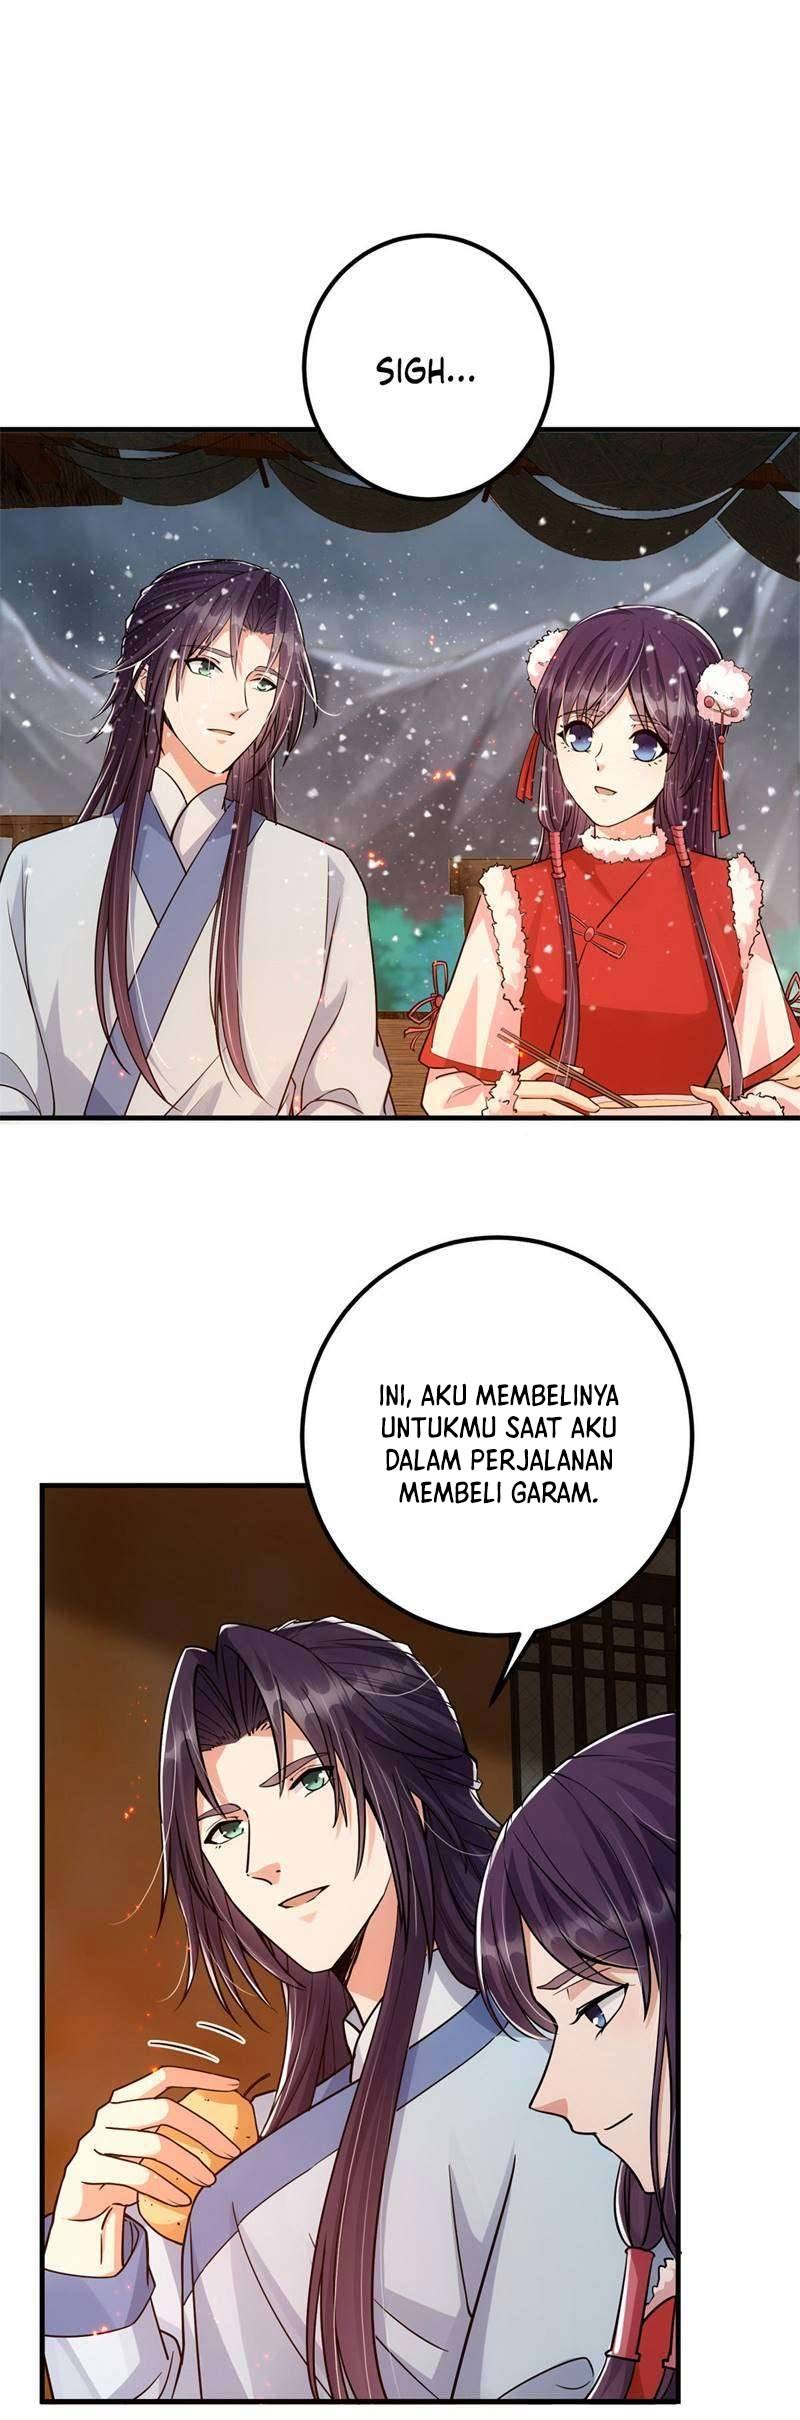 Keep A Low Profile, Sect Leader Chapter 48 Bahasa Indonesia